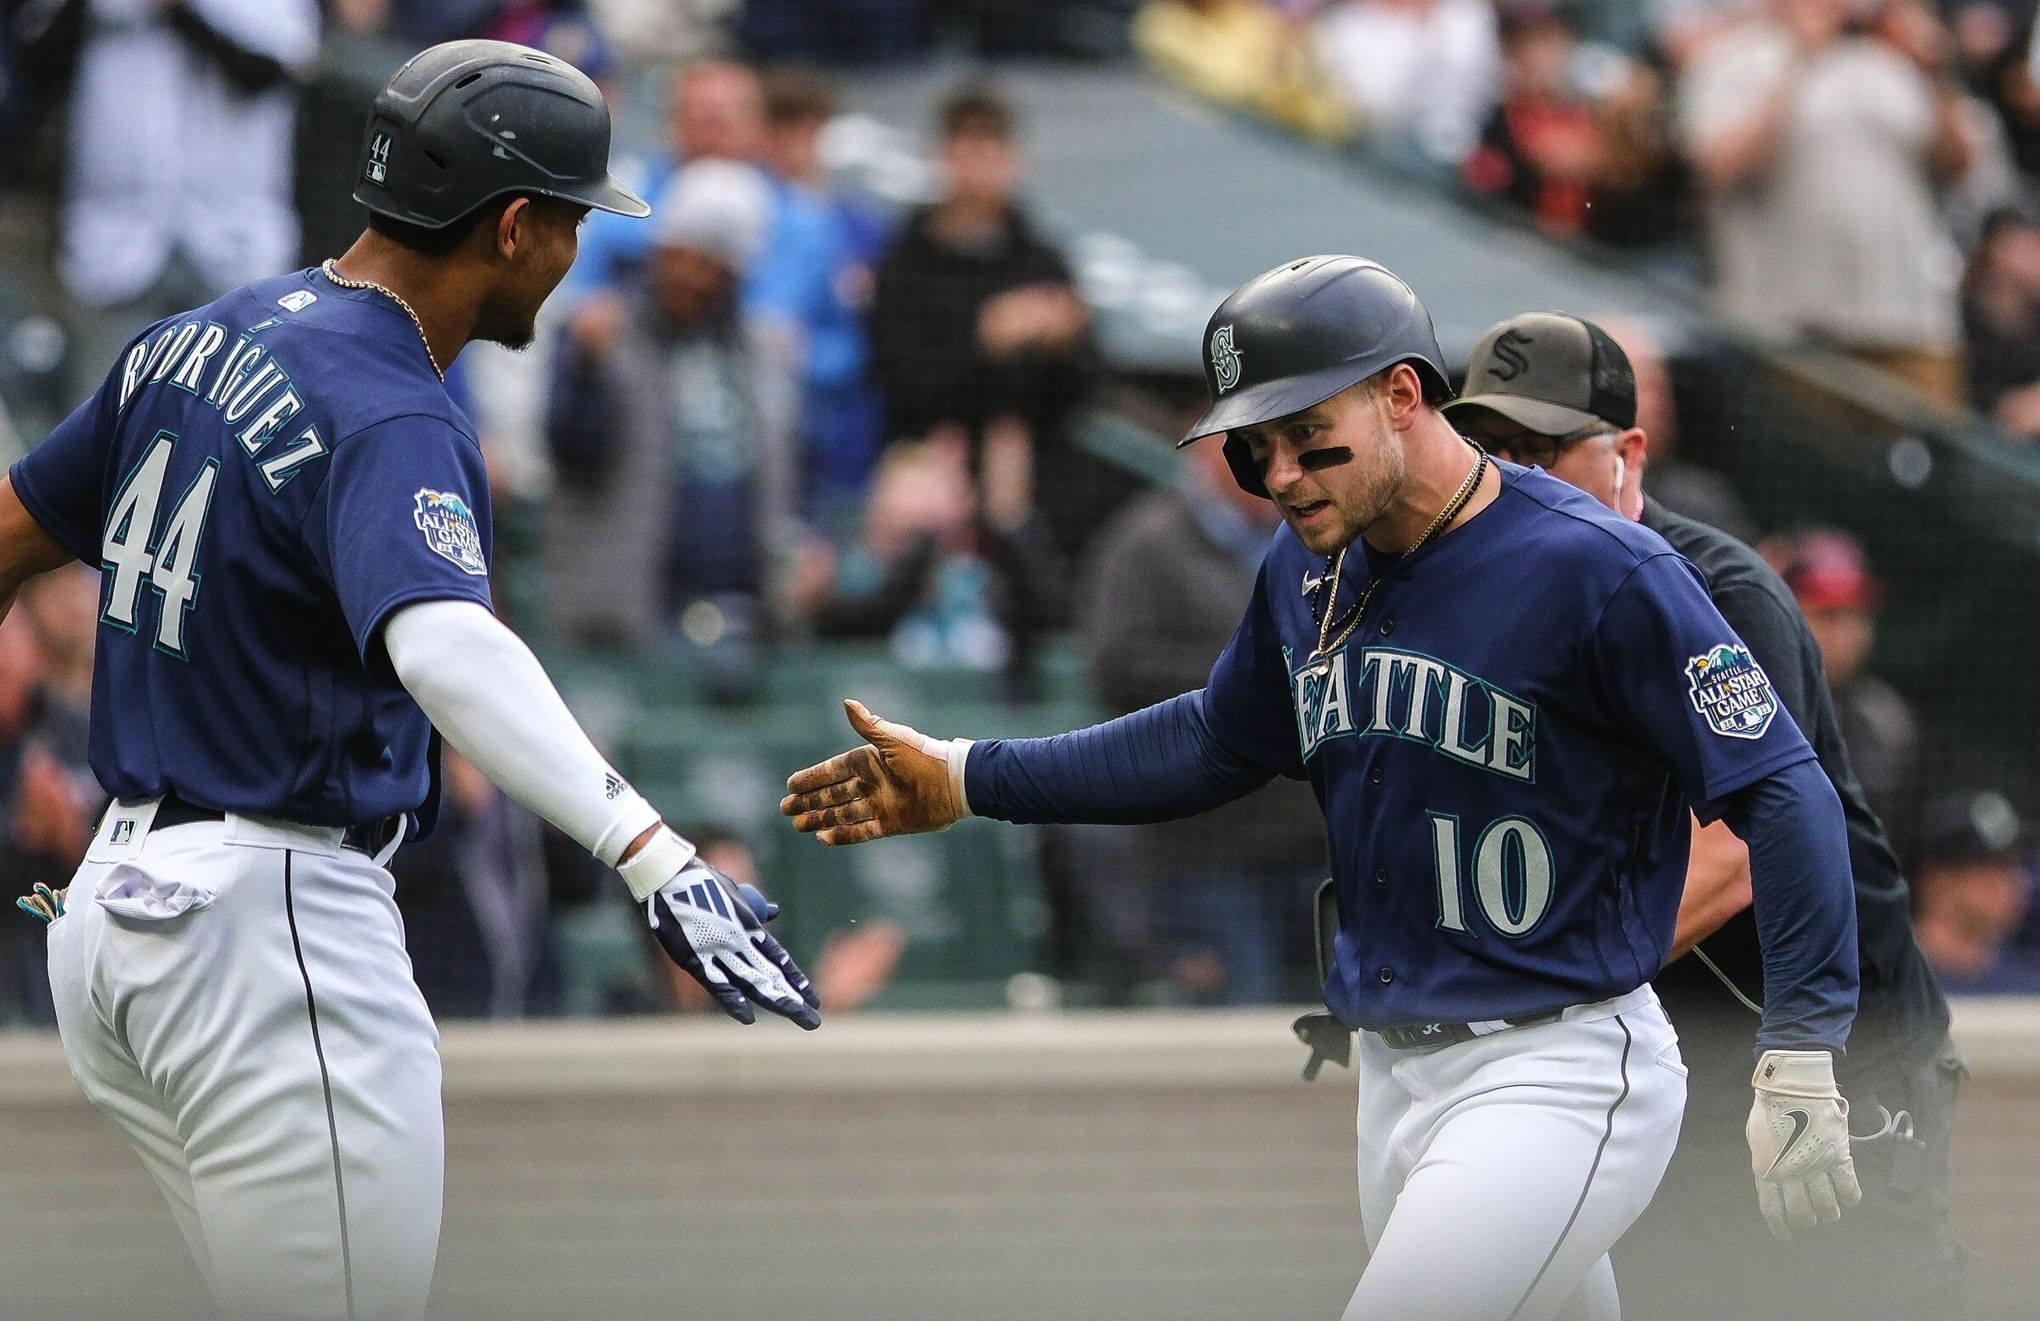 Mariners Dropping Teal, Going Cream and Gold in 2014? – SportsLogos.Net News